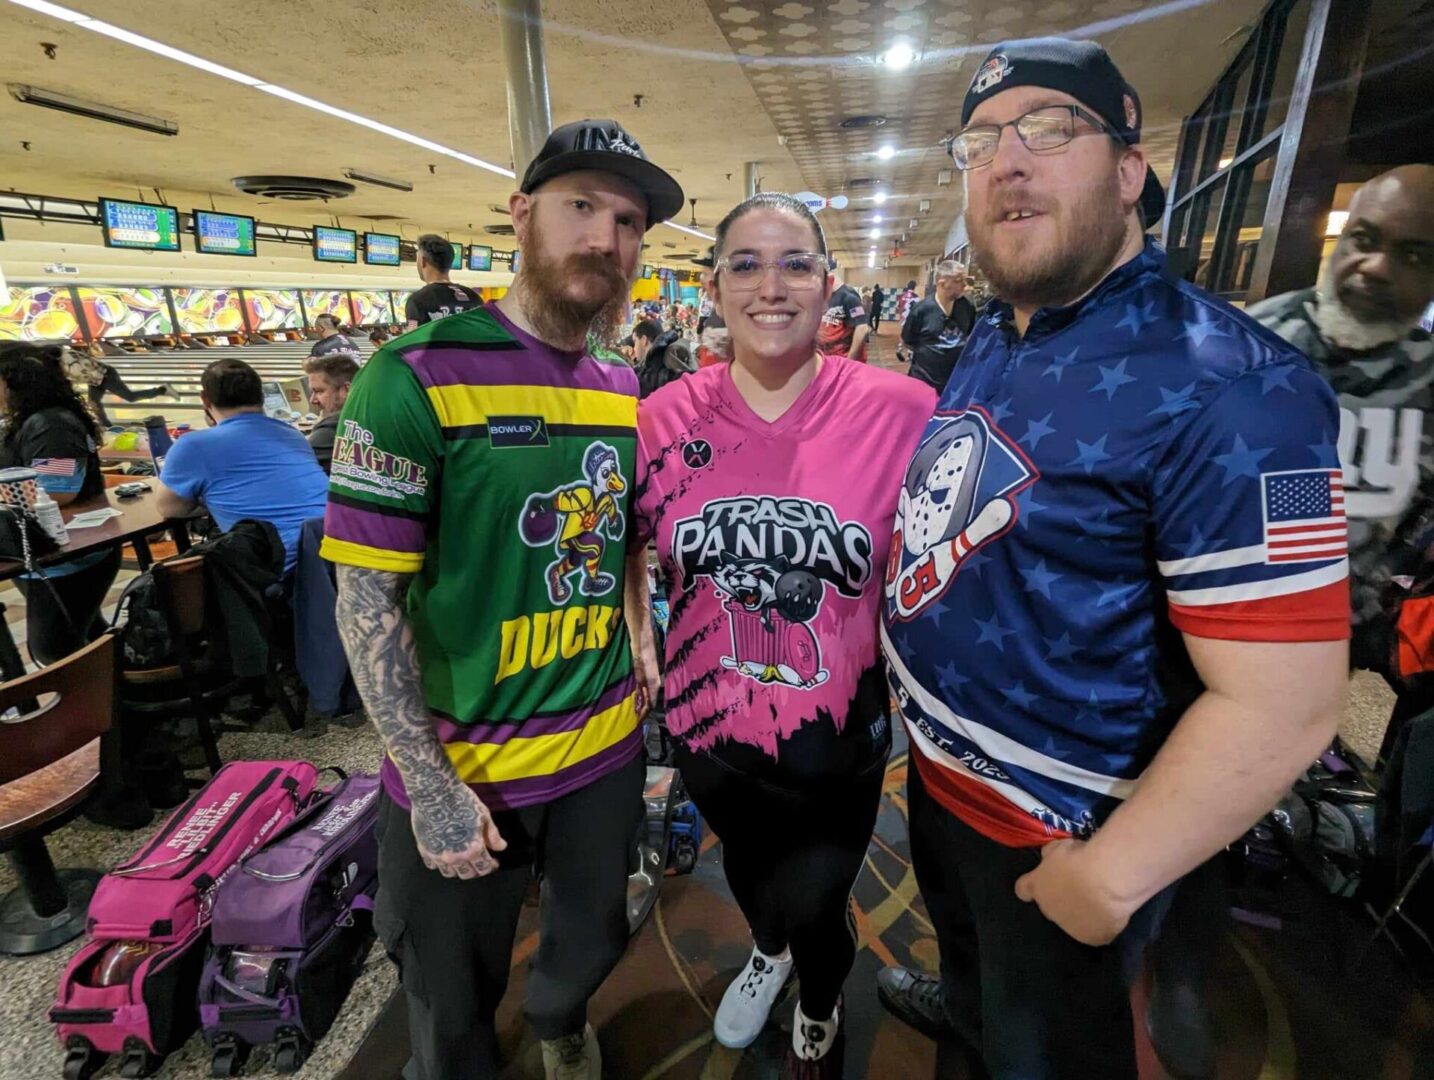 Three people participating in a league pose for a photo at a bowling alley.